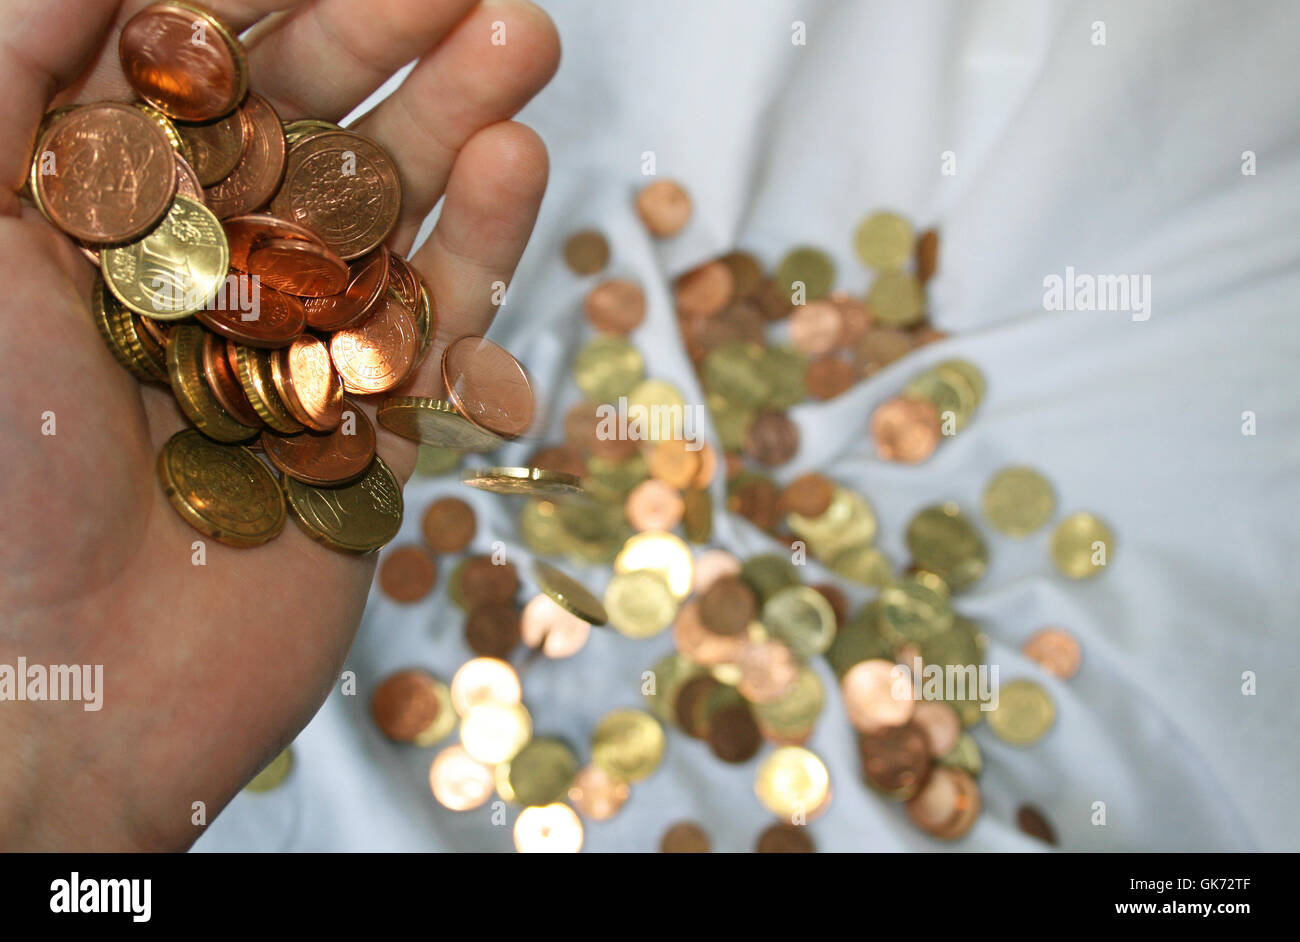 pennies from heaven Stock Photo